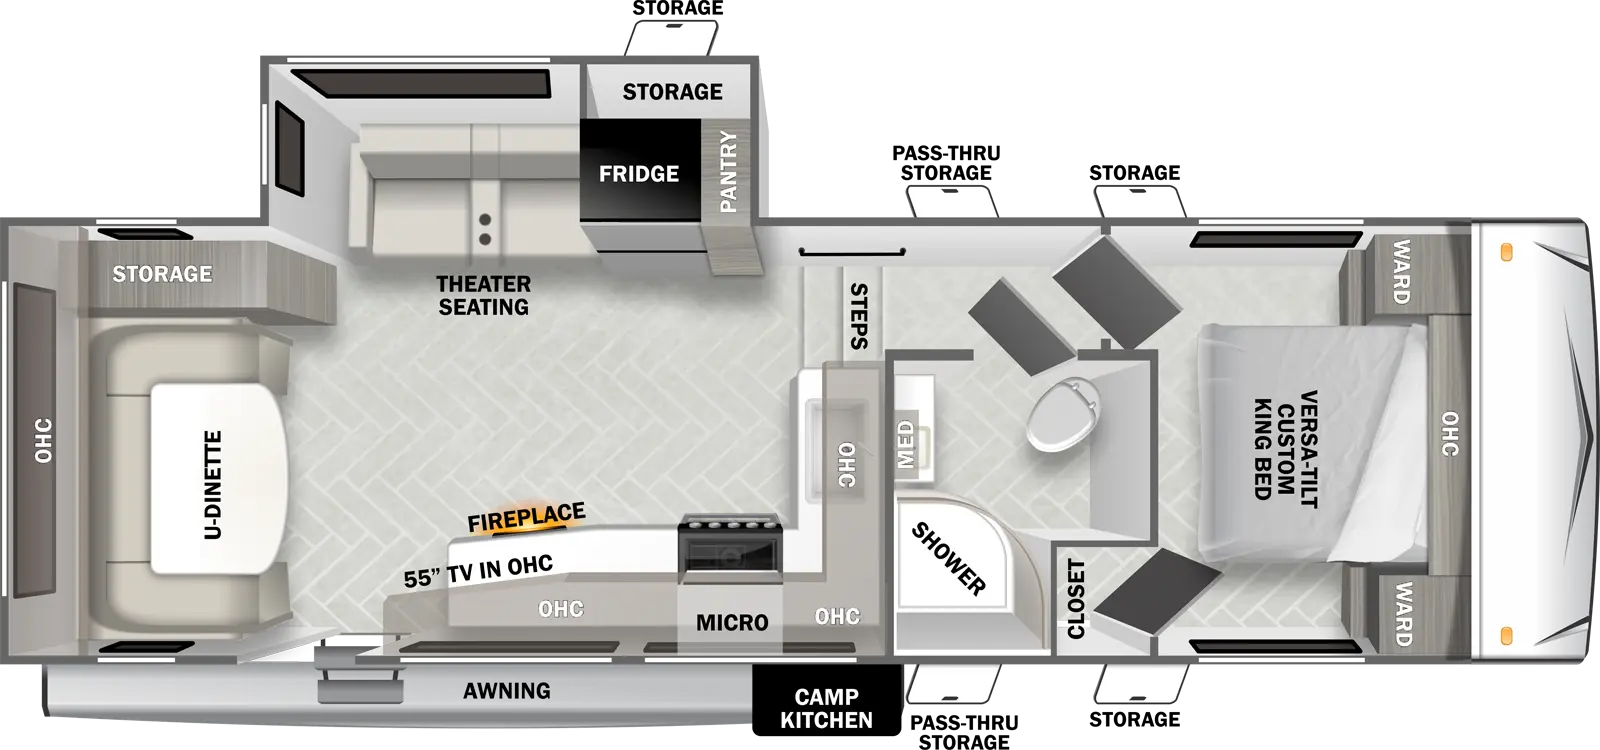 The F255RD has one slideout and two entries. Exterior features storage, camp kitchen, and awning. Interior layout front to back: foot-facing RV king bed with shelf, wardrobes on each side, off-door side hamper, and entry; Full split pass-through bathroom with linen closet and medicine cabinet; off-door side slideout with pantry, refrigerator, and sleeper sofa; kitchen counter with sink and overhead cabinet wrap from inner wall to door side with microwave, cooktop, fireplace and second entry; rear u-dinette, storage, and overhead cabinet.